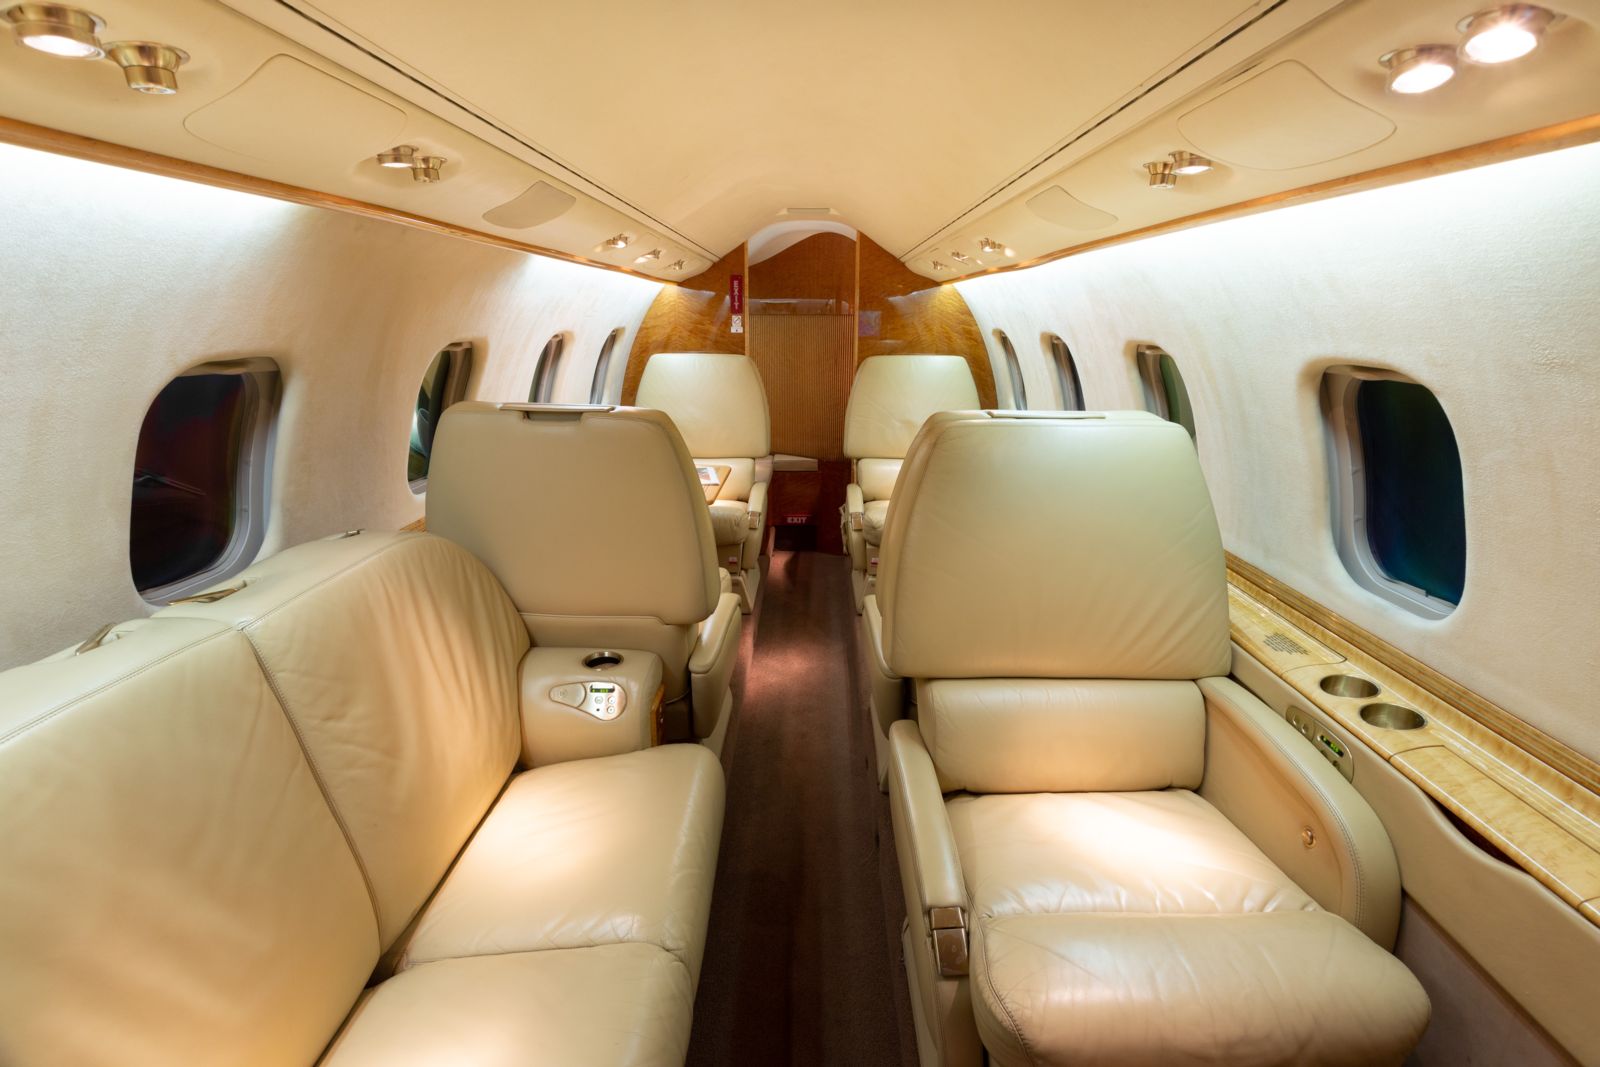 Bombardier Learjet 60  S/N 269 for sale | gallery image: /userfiles/images/Lear60_sn269/fwd%20aft.jpg